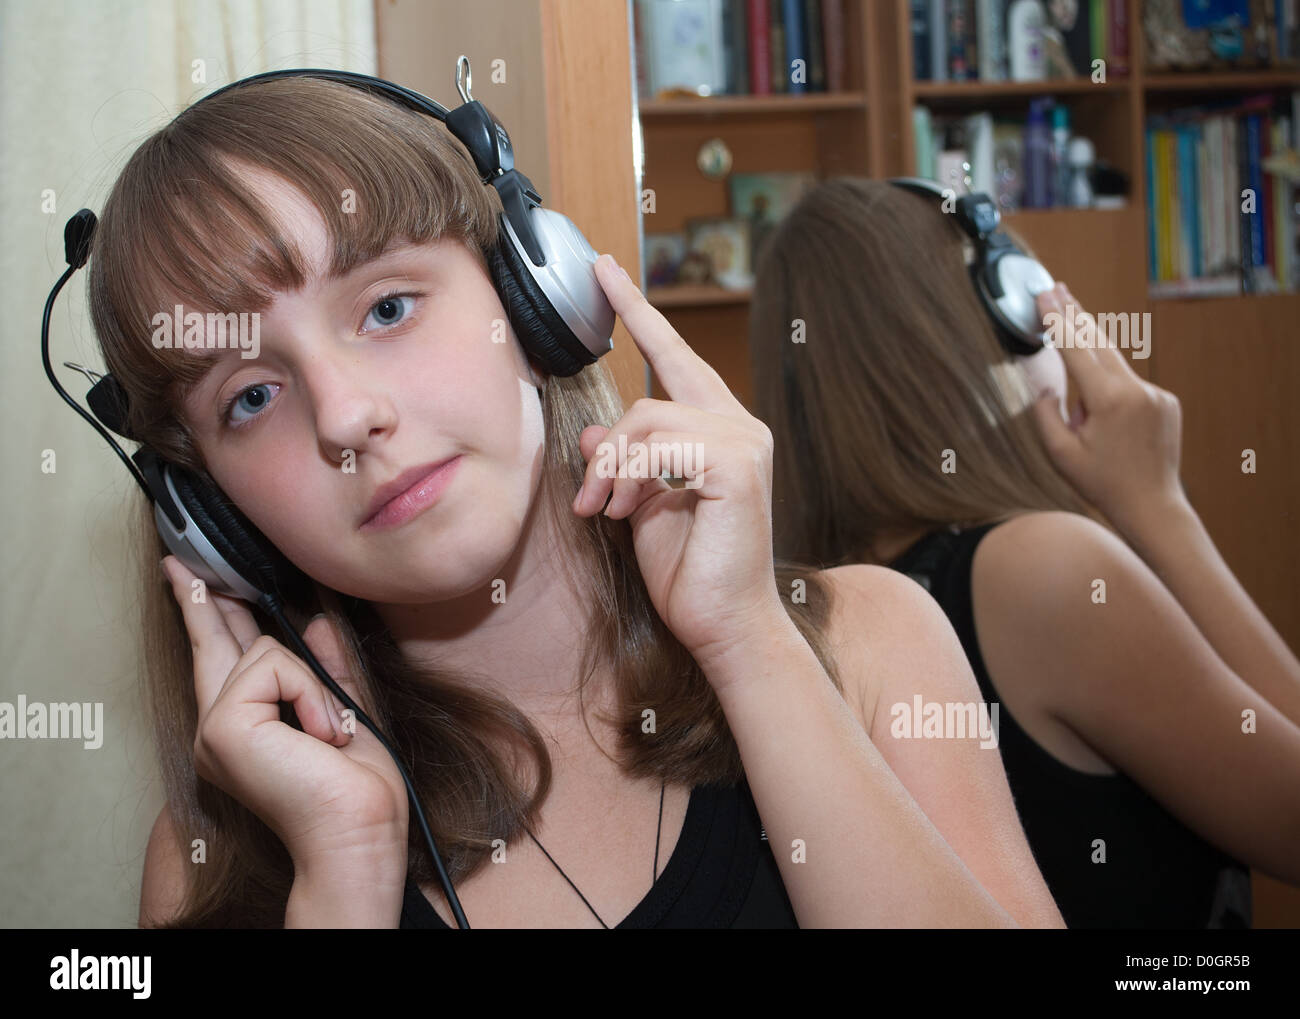 Girl with headphones Banque D'Images